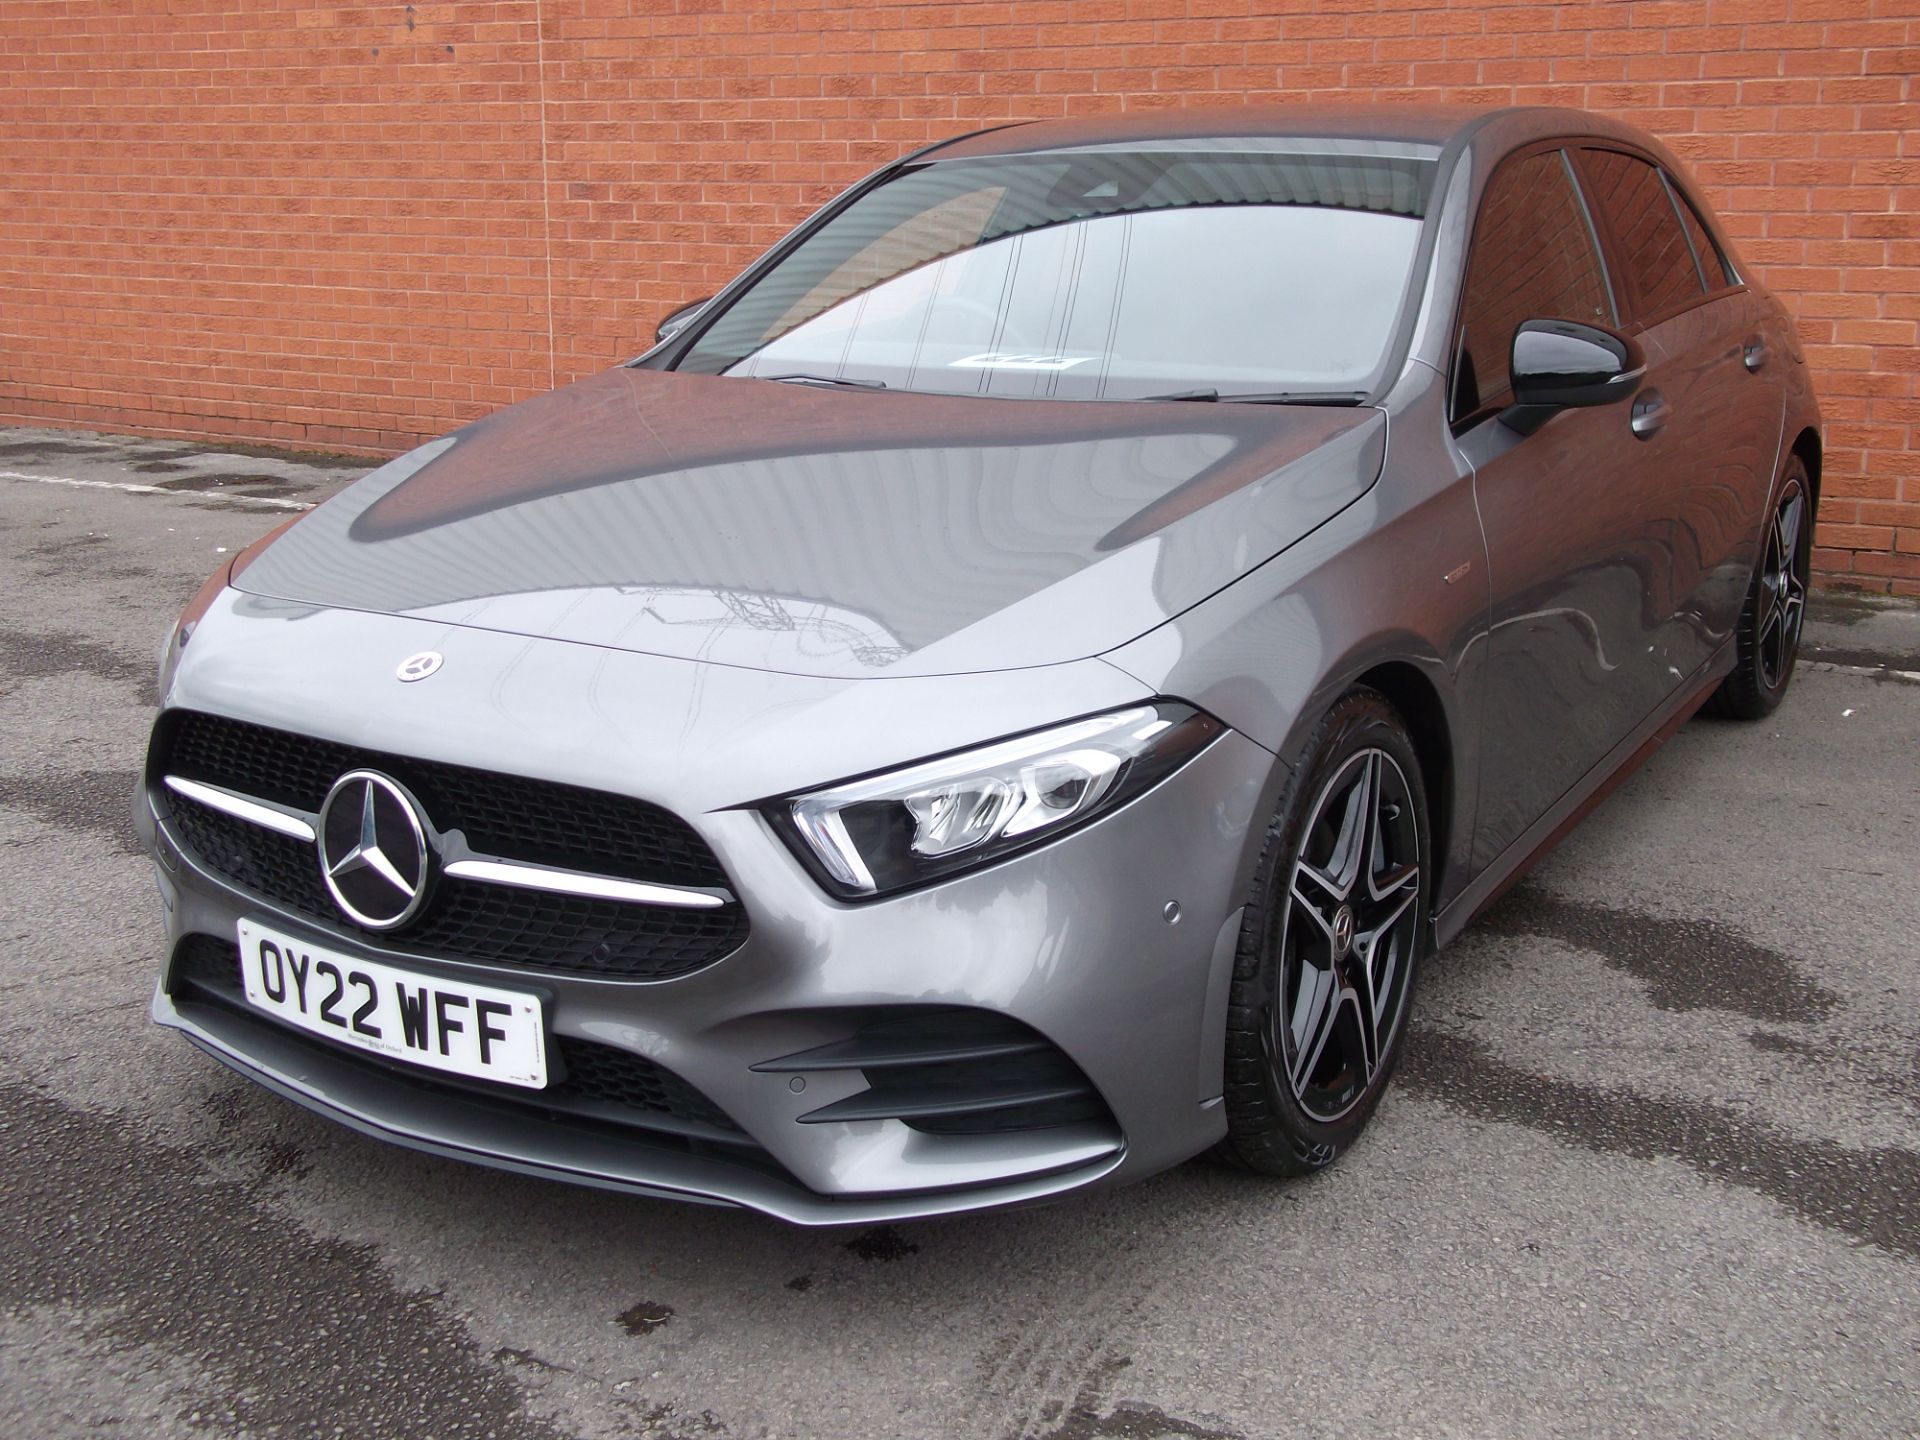 2022 Mercedes-Benz A Class A200 AMG Line executive edition auto 5Dr  (OY22WFF) Image 4